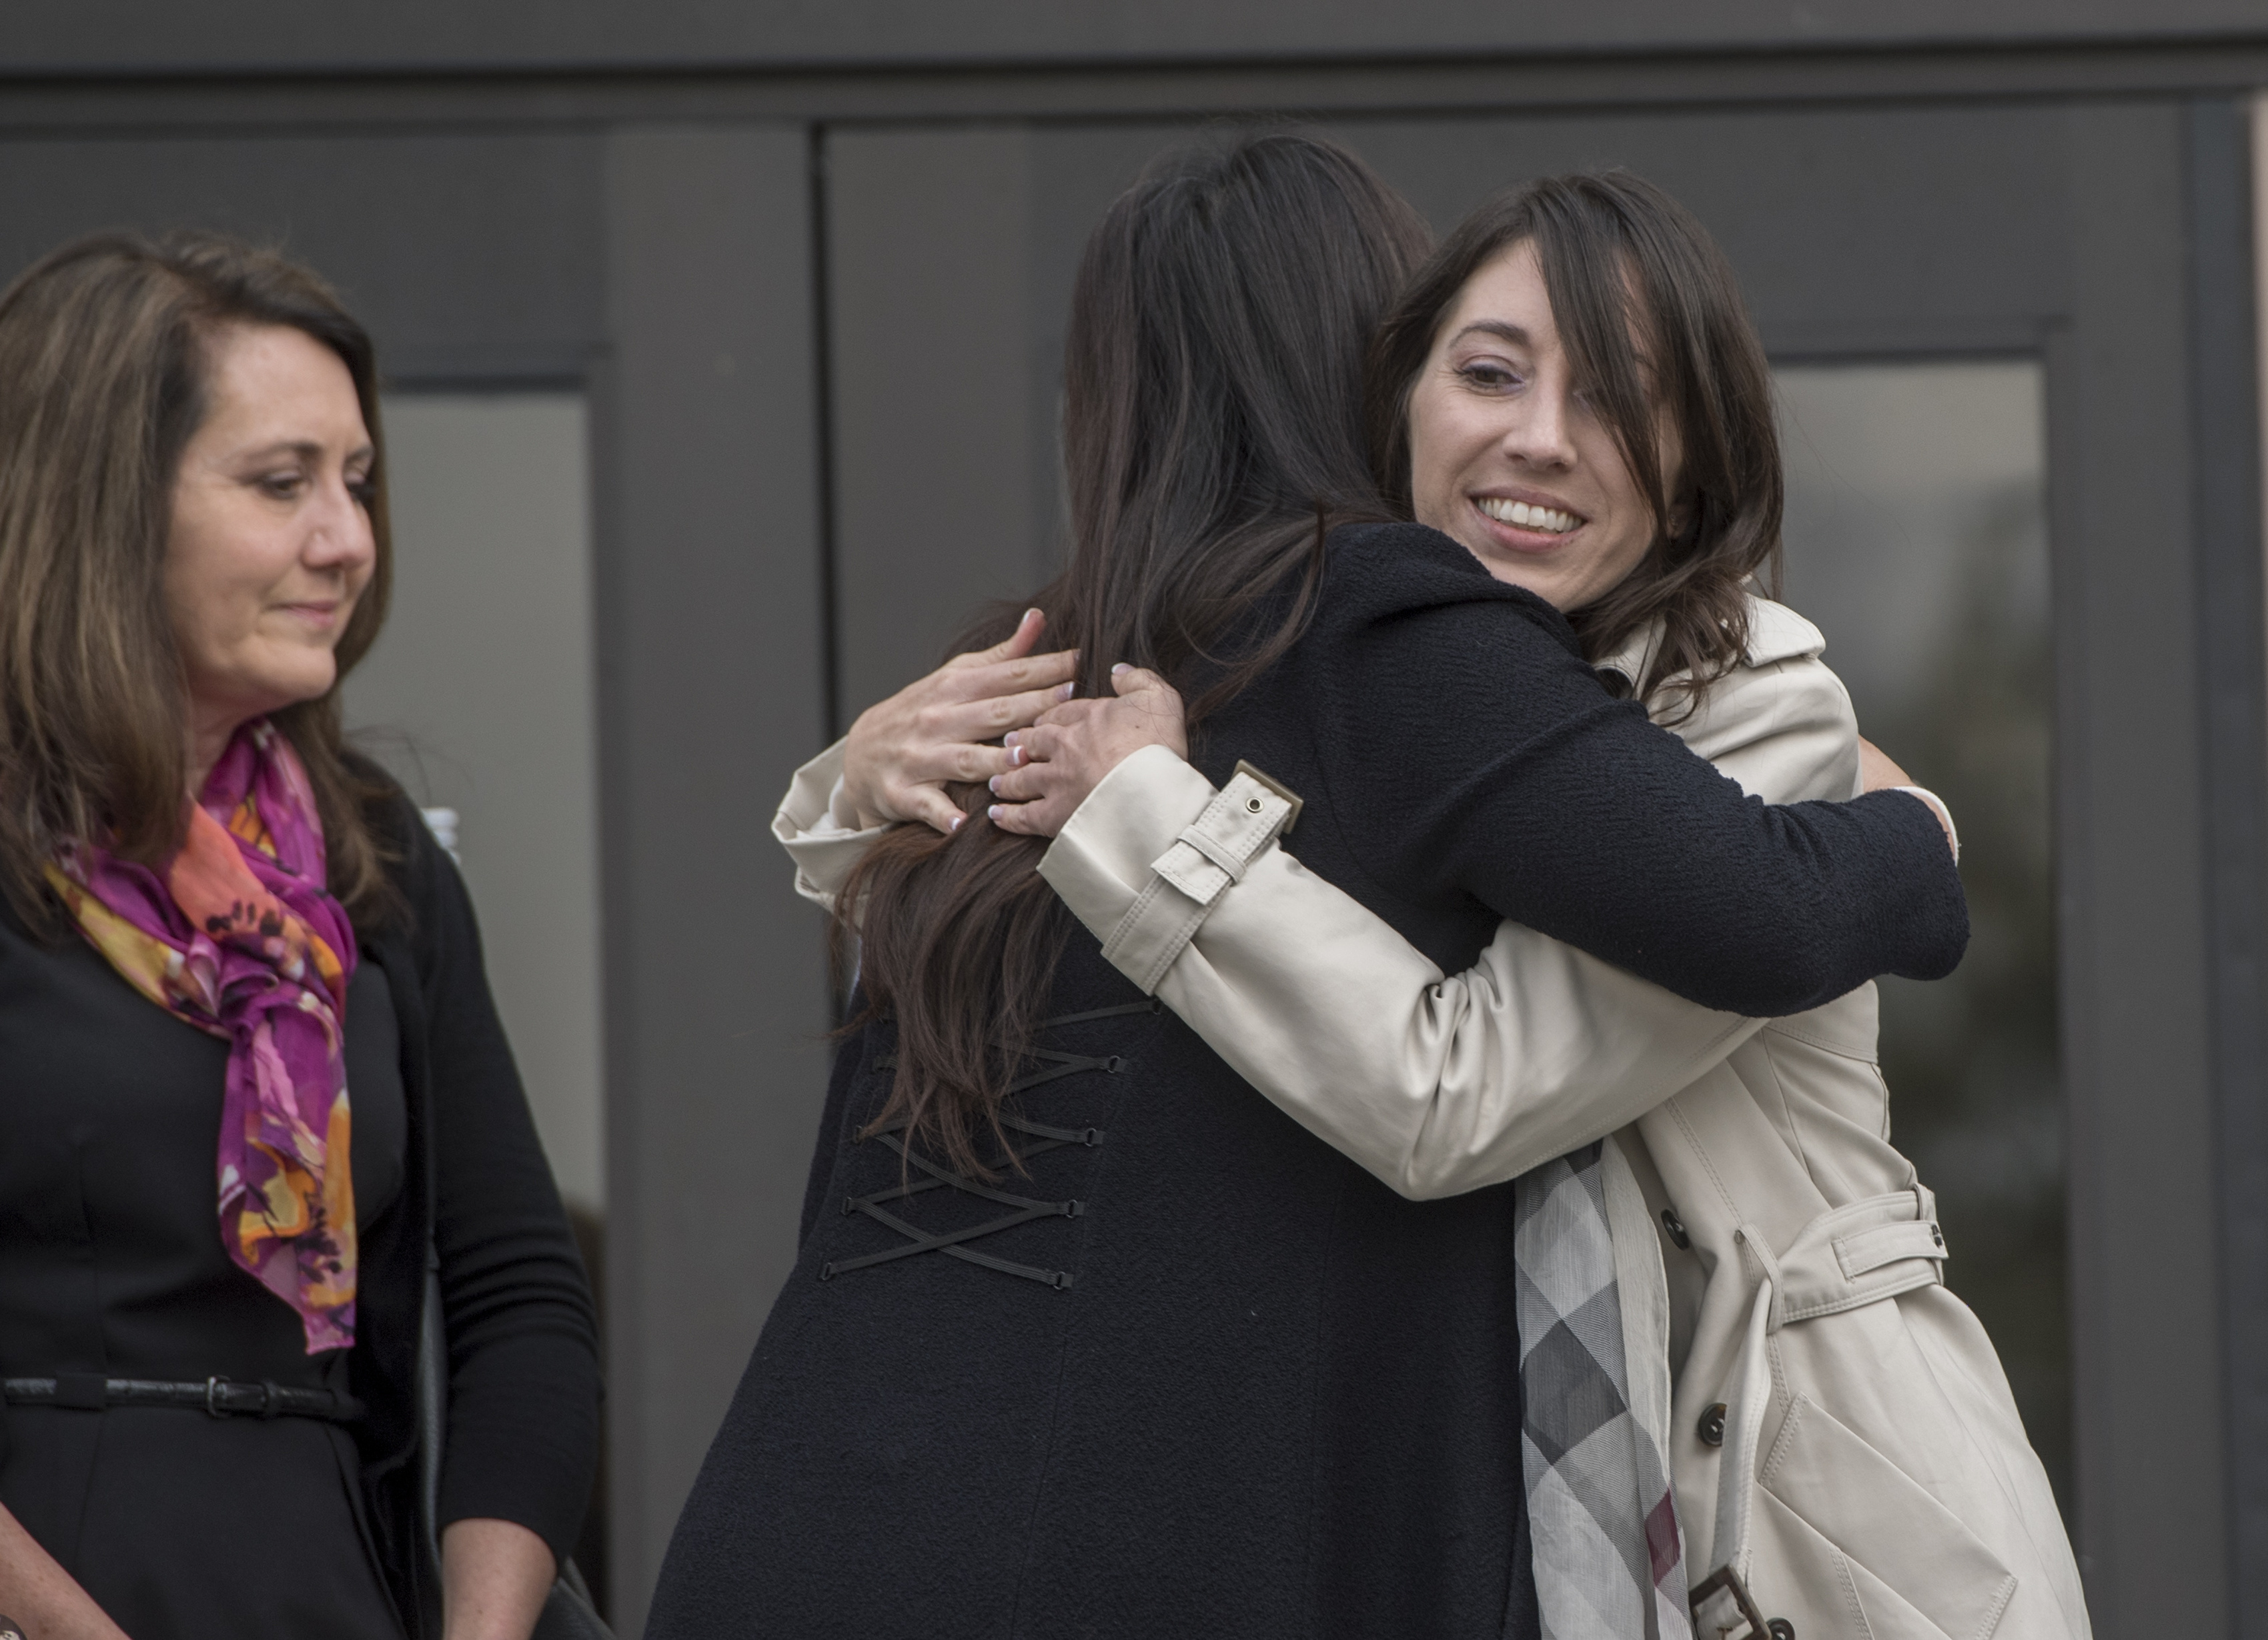 Michelle Susan Hadley, right, hugs Orange County District Attorney Chief of Staff Susan Kang Schroeder after being cleared of all charges in a complicated plot to frame her in Fullerton, Calif., on Jan. 9, 2017. (Jeff Gritchen&mdash;AP)